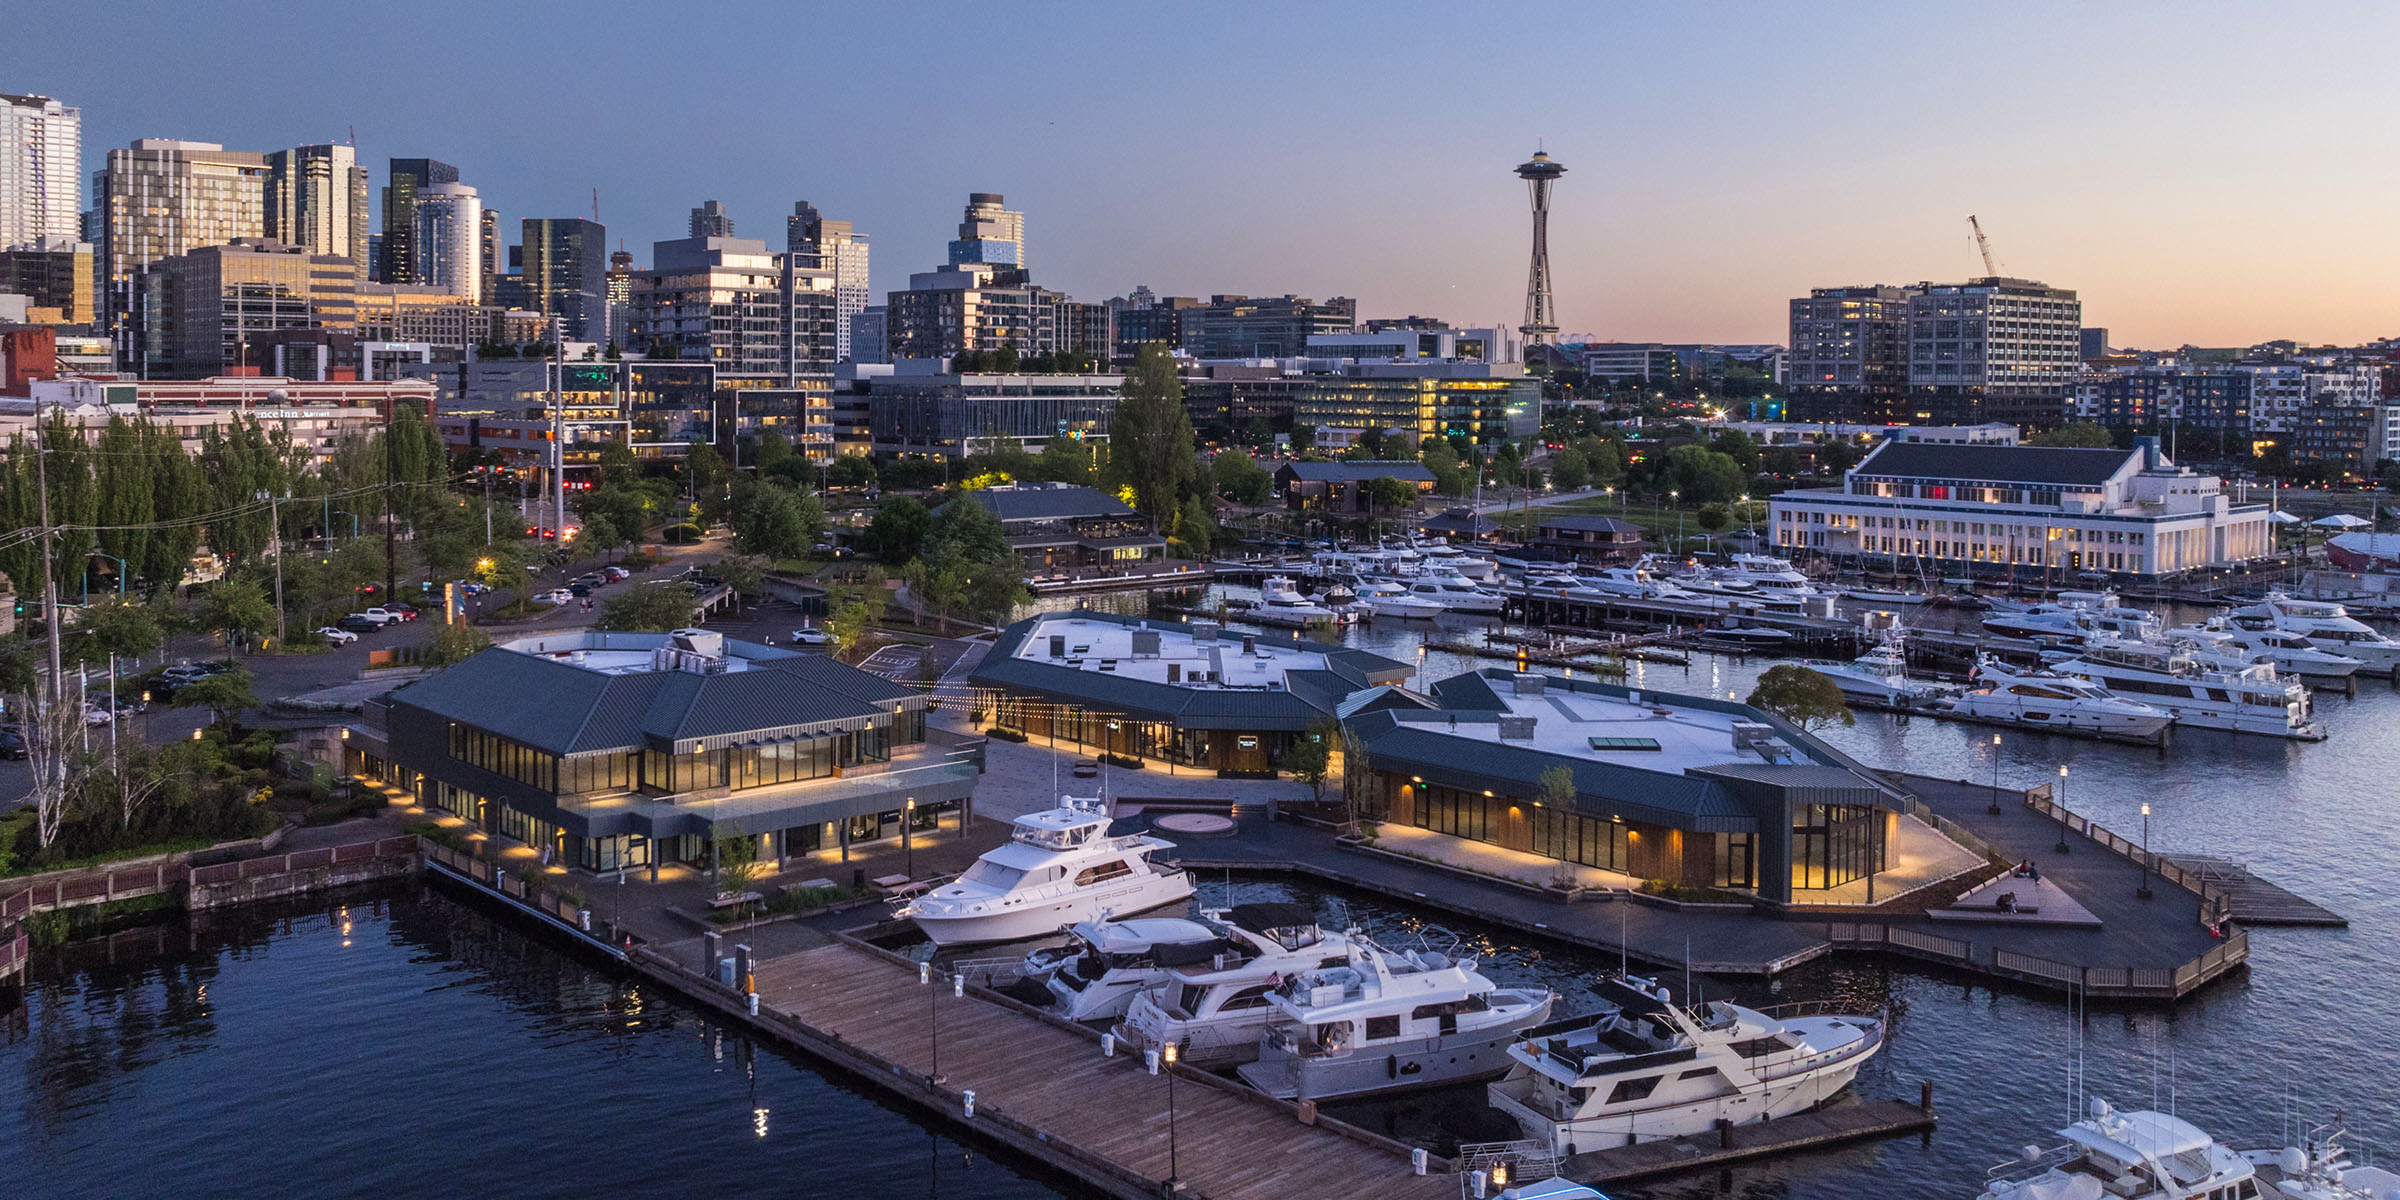 lake union piers and seattle skyline at dusk